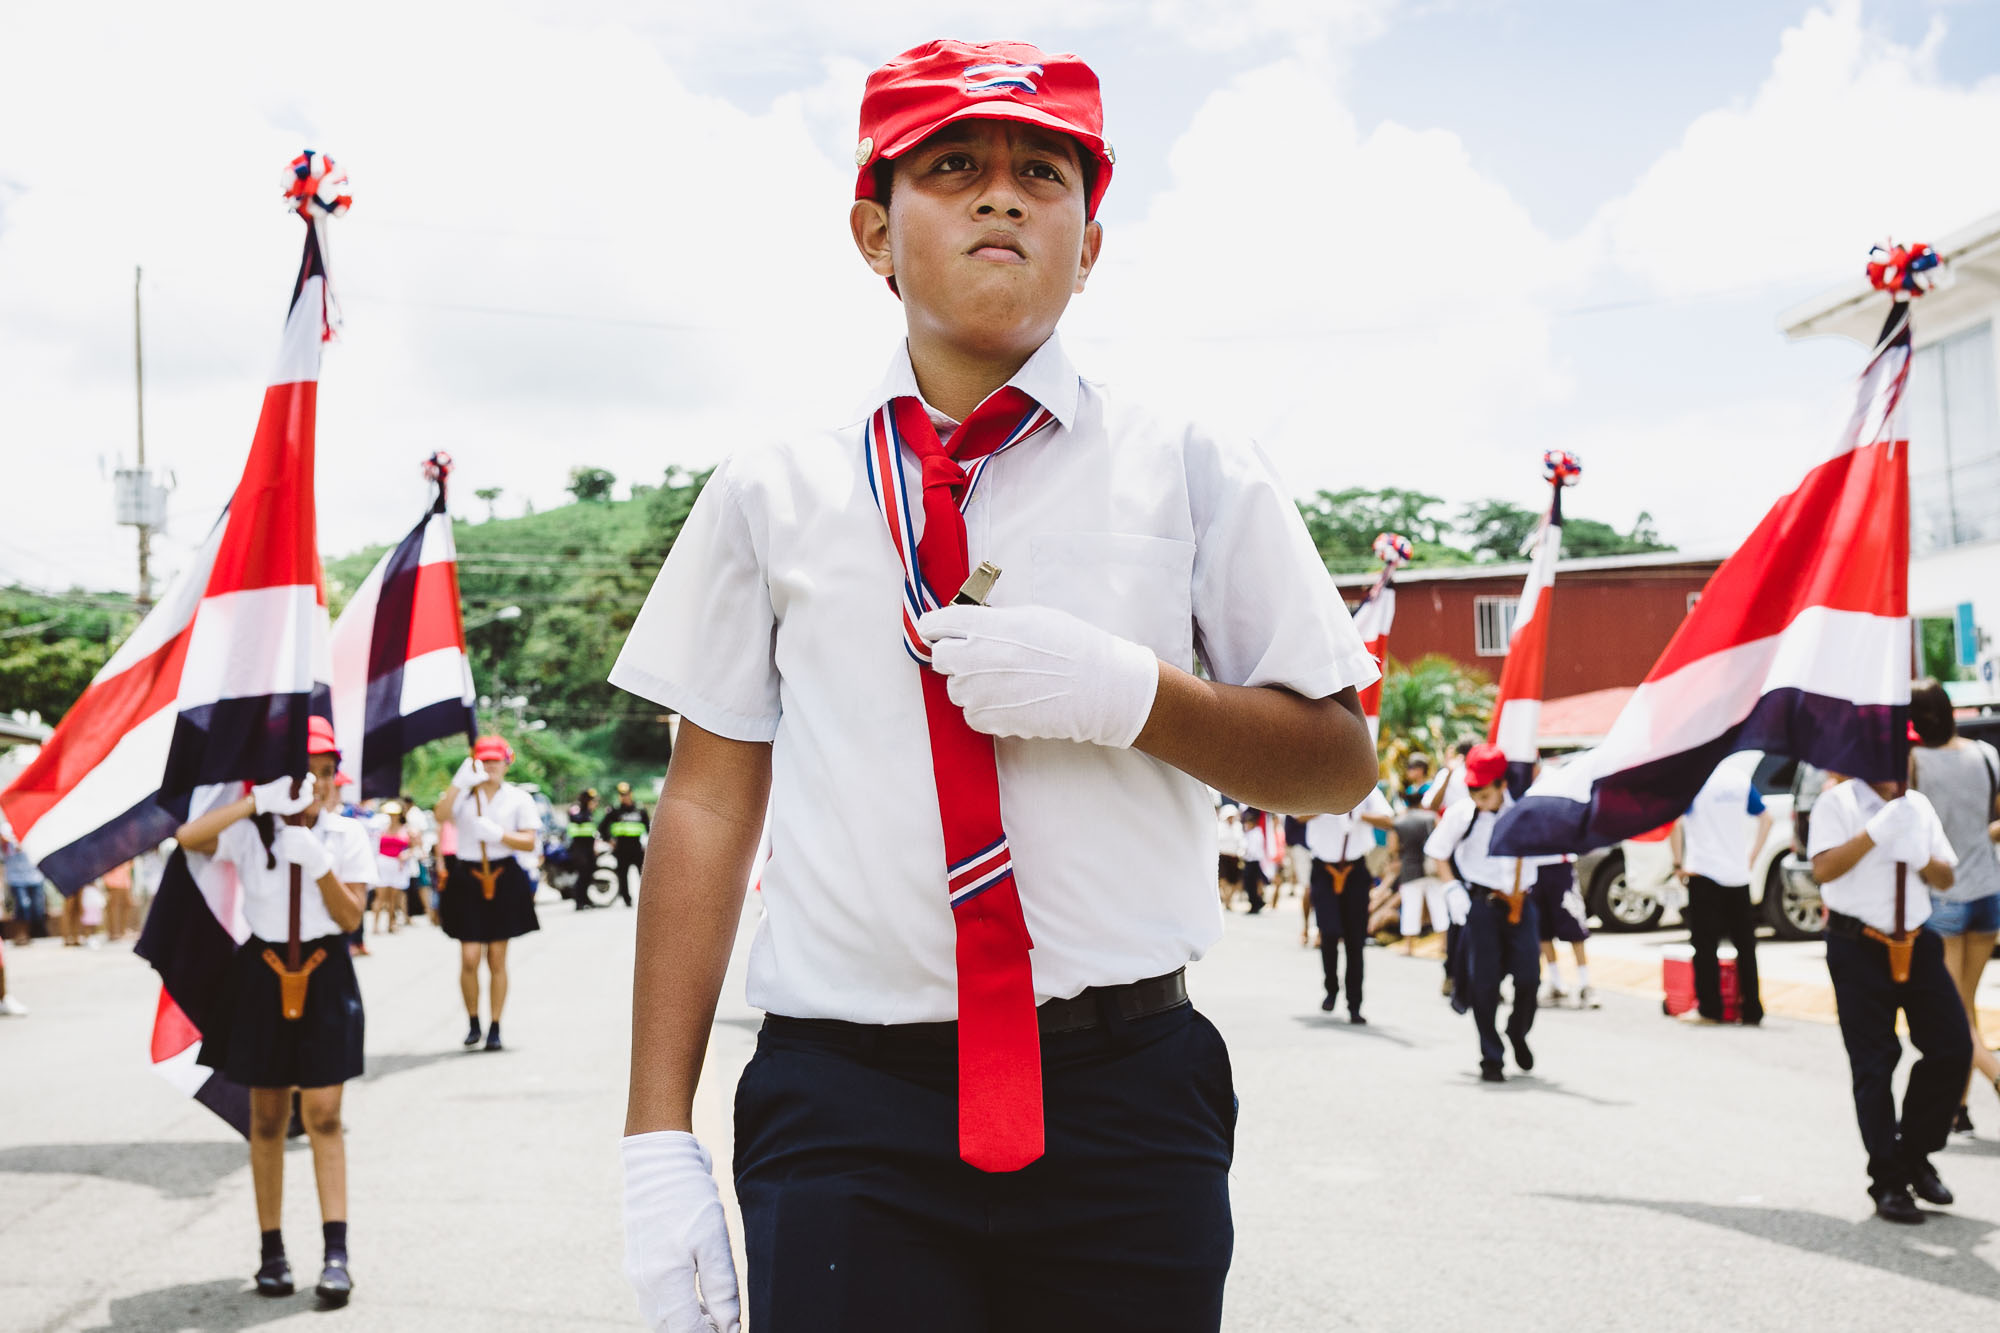 Boy marching in the parade for independence day in Costa Rica